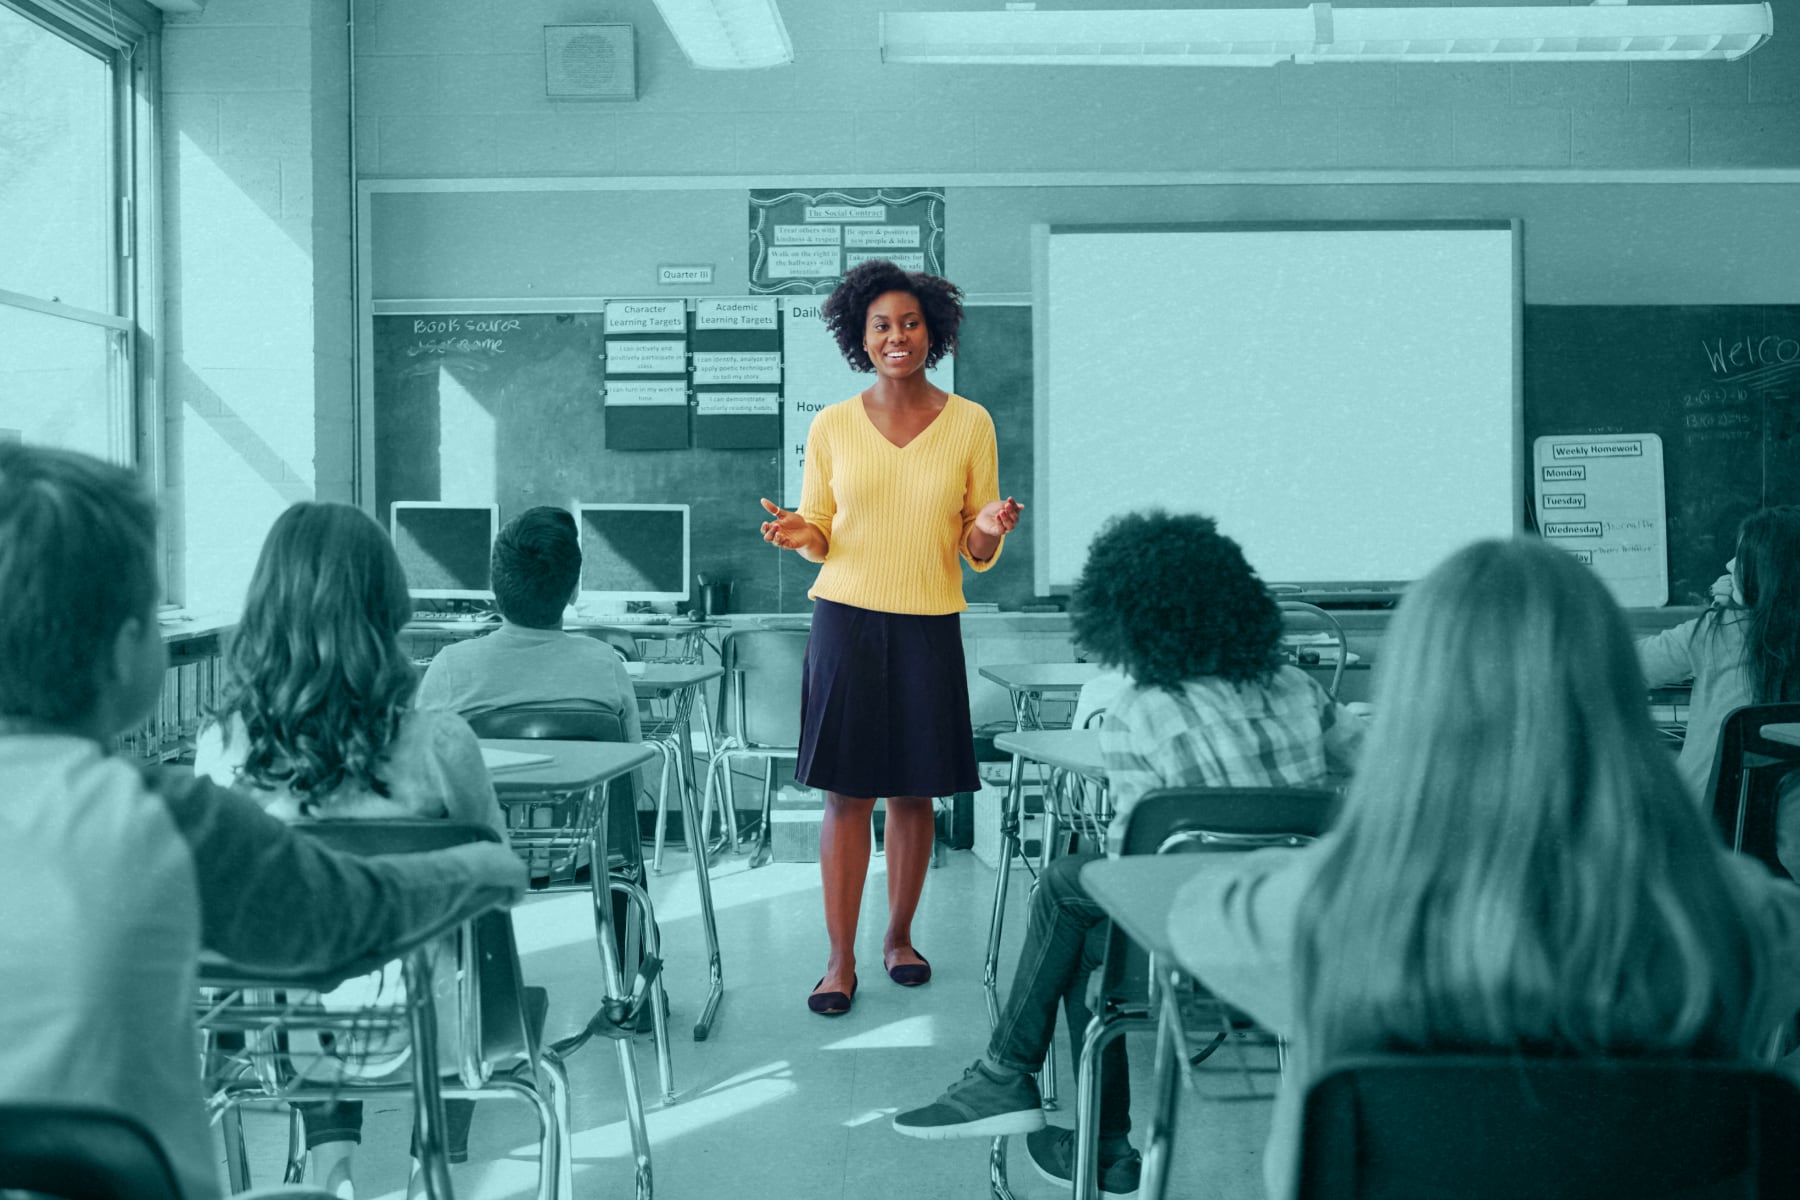 A new teacher standing at the front of her first class of sixth grade students.